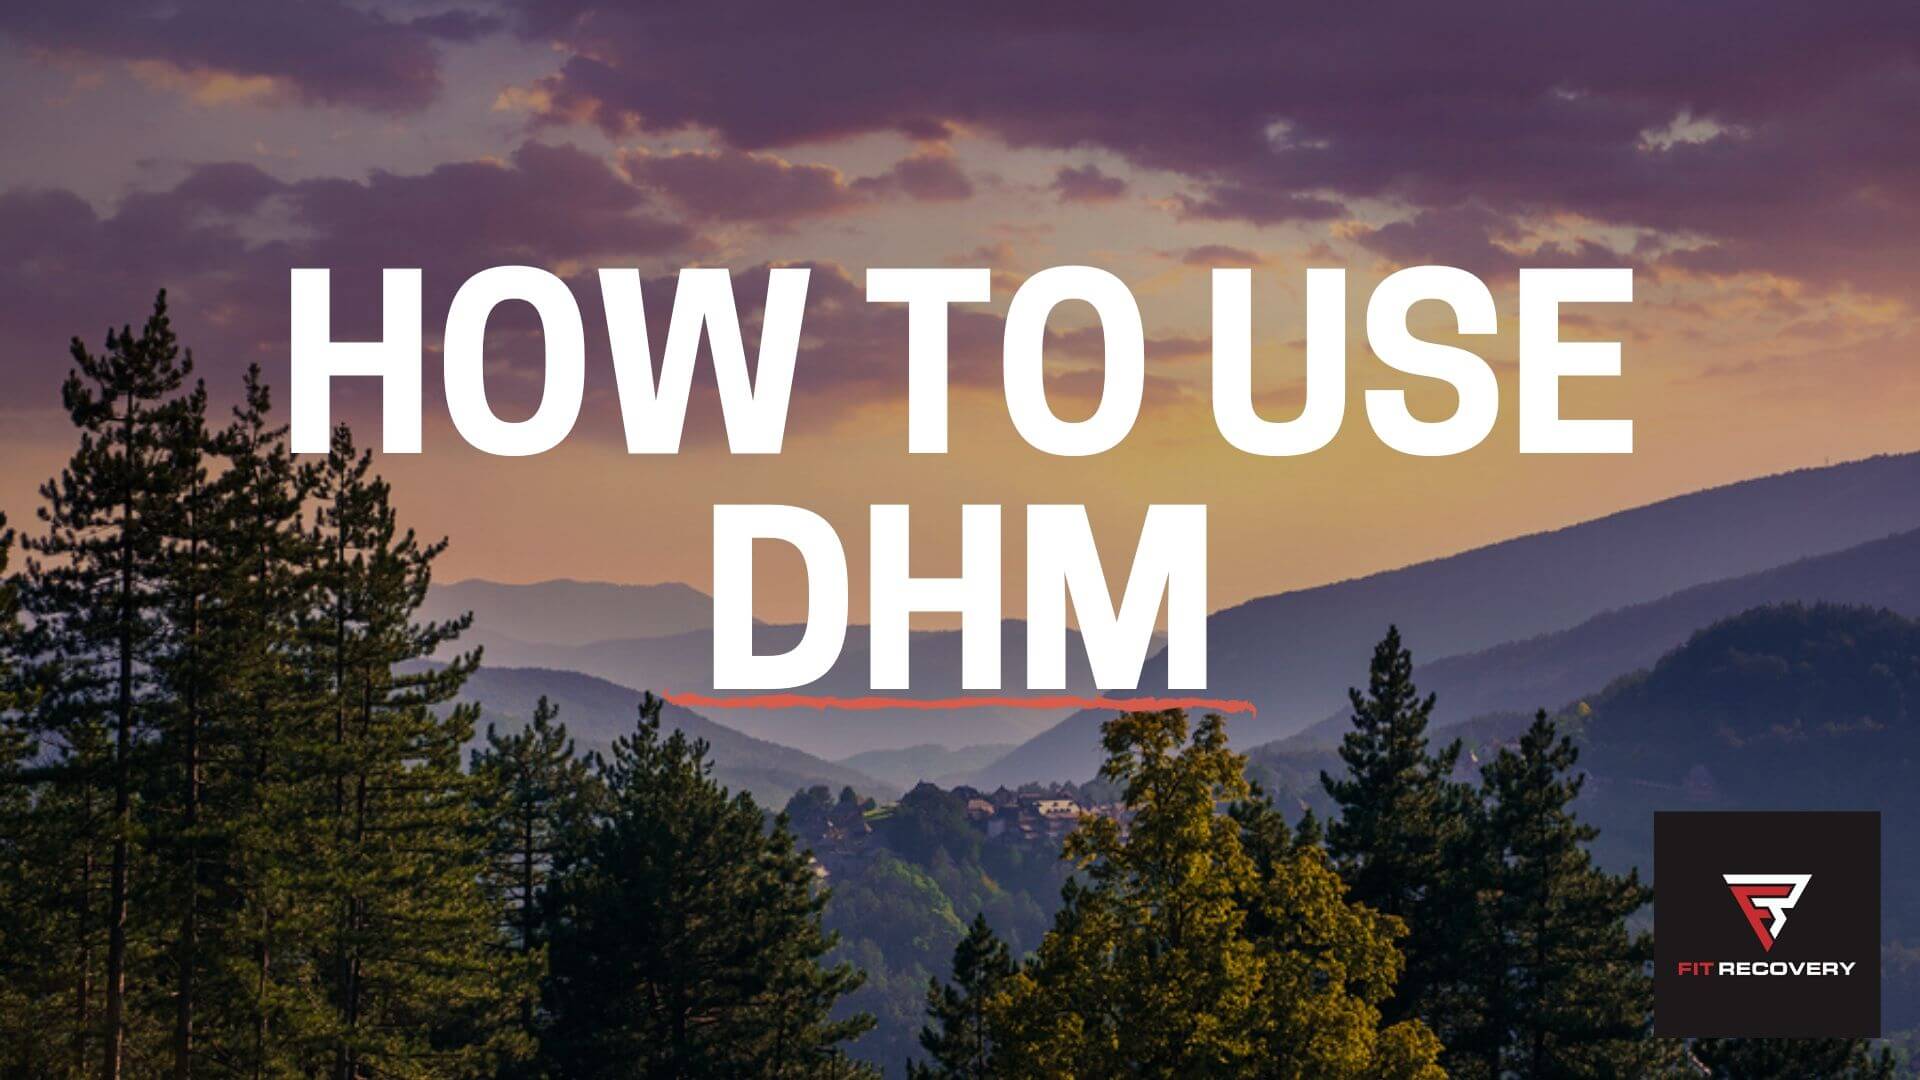 dhm for alcohol withdrawal